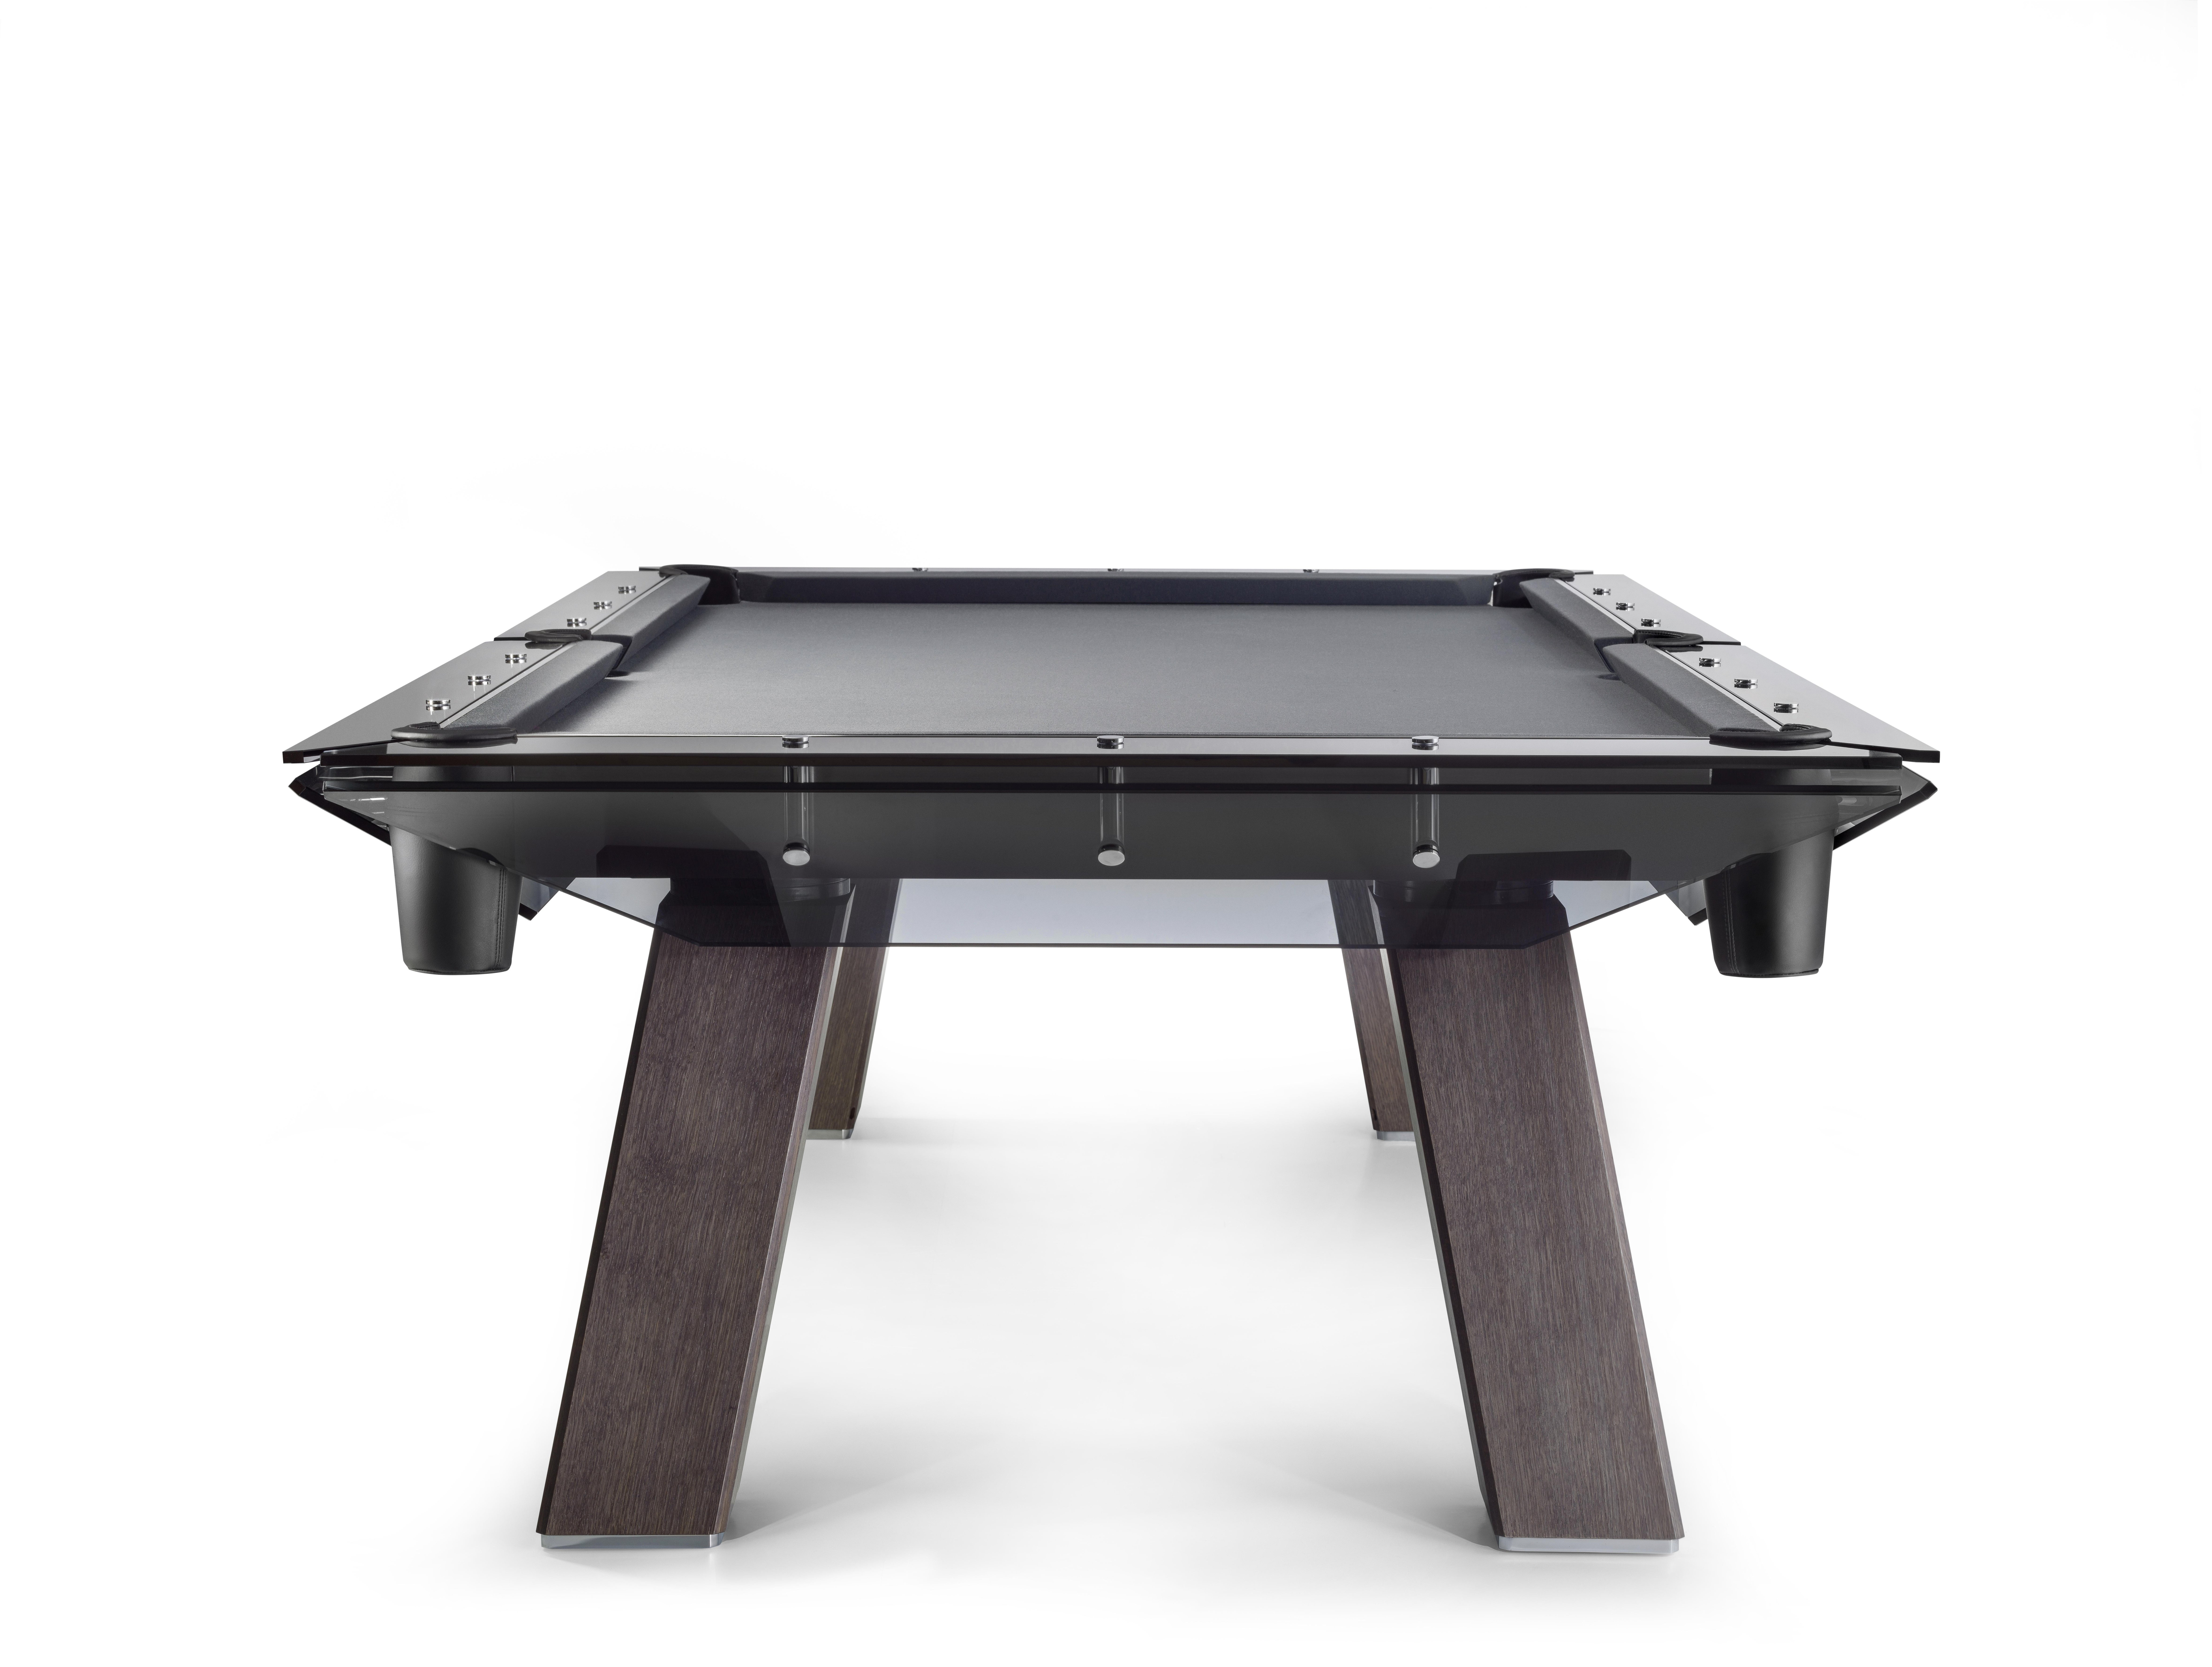 Filotto wood edition billiard table gives a new life, new characteristics, and new values to a Classic product. The design, construction, and workmanship of this work of genius are all Italian, showcasing the highest expression of technological